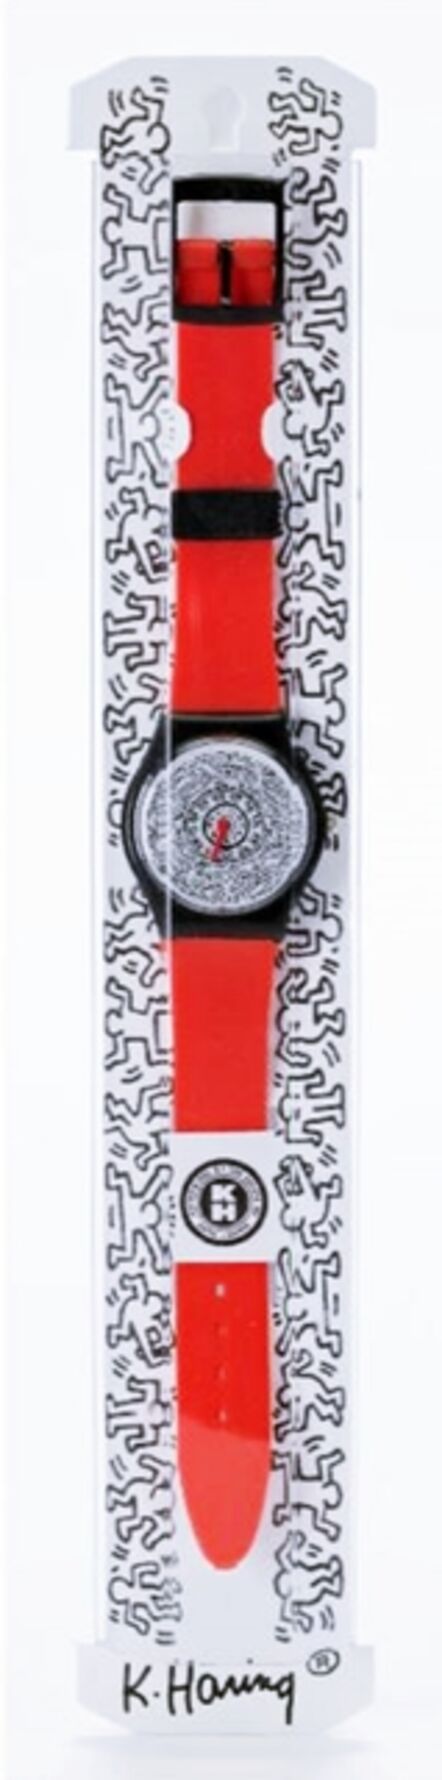 Keith Haring, ‘Keith Haring Running Time Wrist Watch (Red)’, ca. 1992